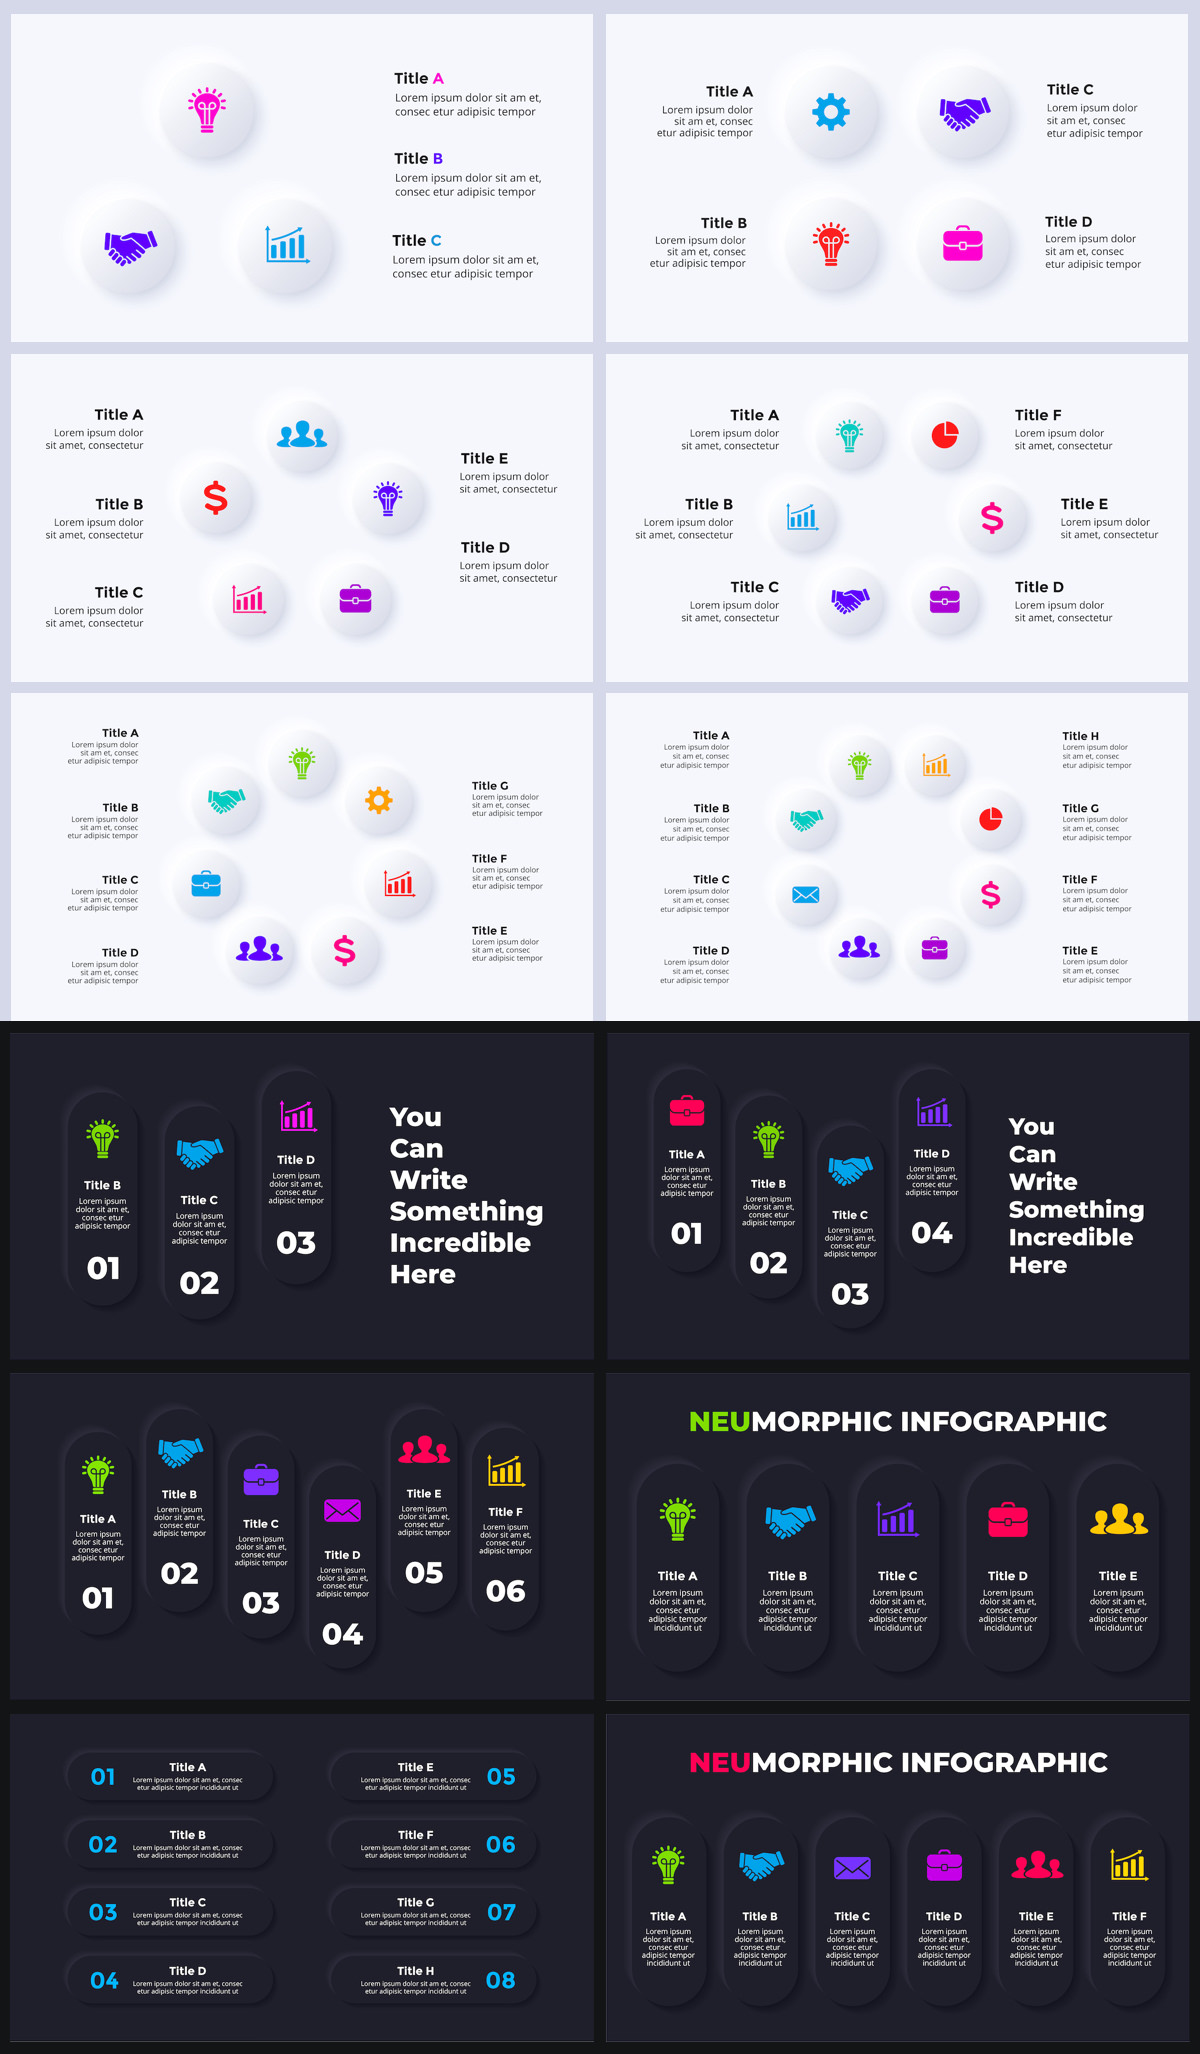 Wowly - 3500 Infographics & Presentation Templates! Updated! PowerPoint Canva Figma Sketch Ai Psd. - 319